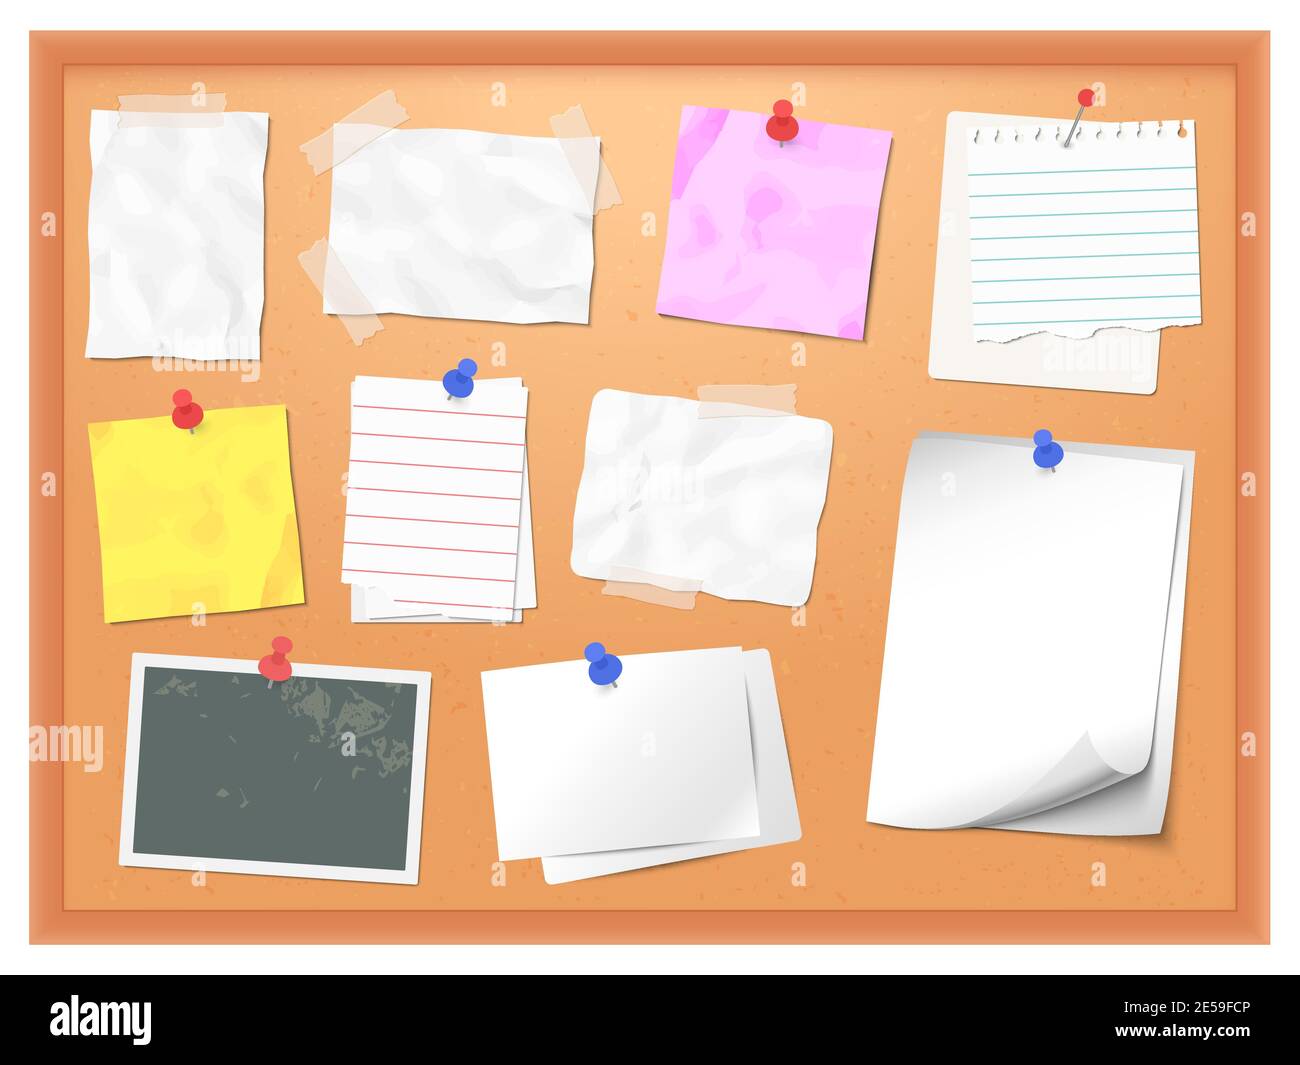 9,534 Office Cork Board Sticky Notes Images, Stock Photos, 3D objects, &  Vectors